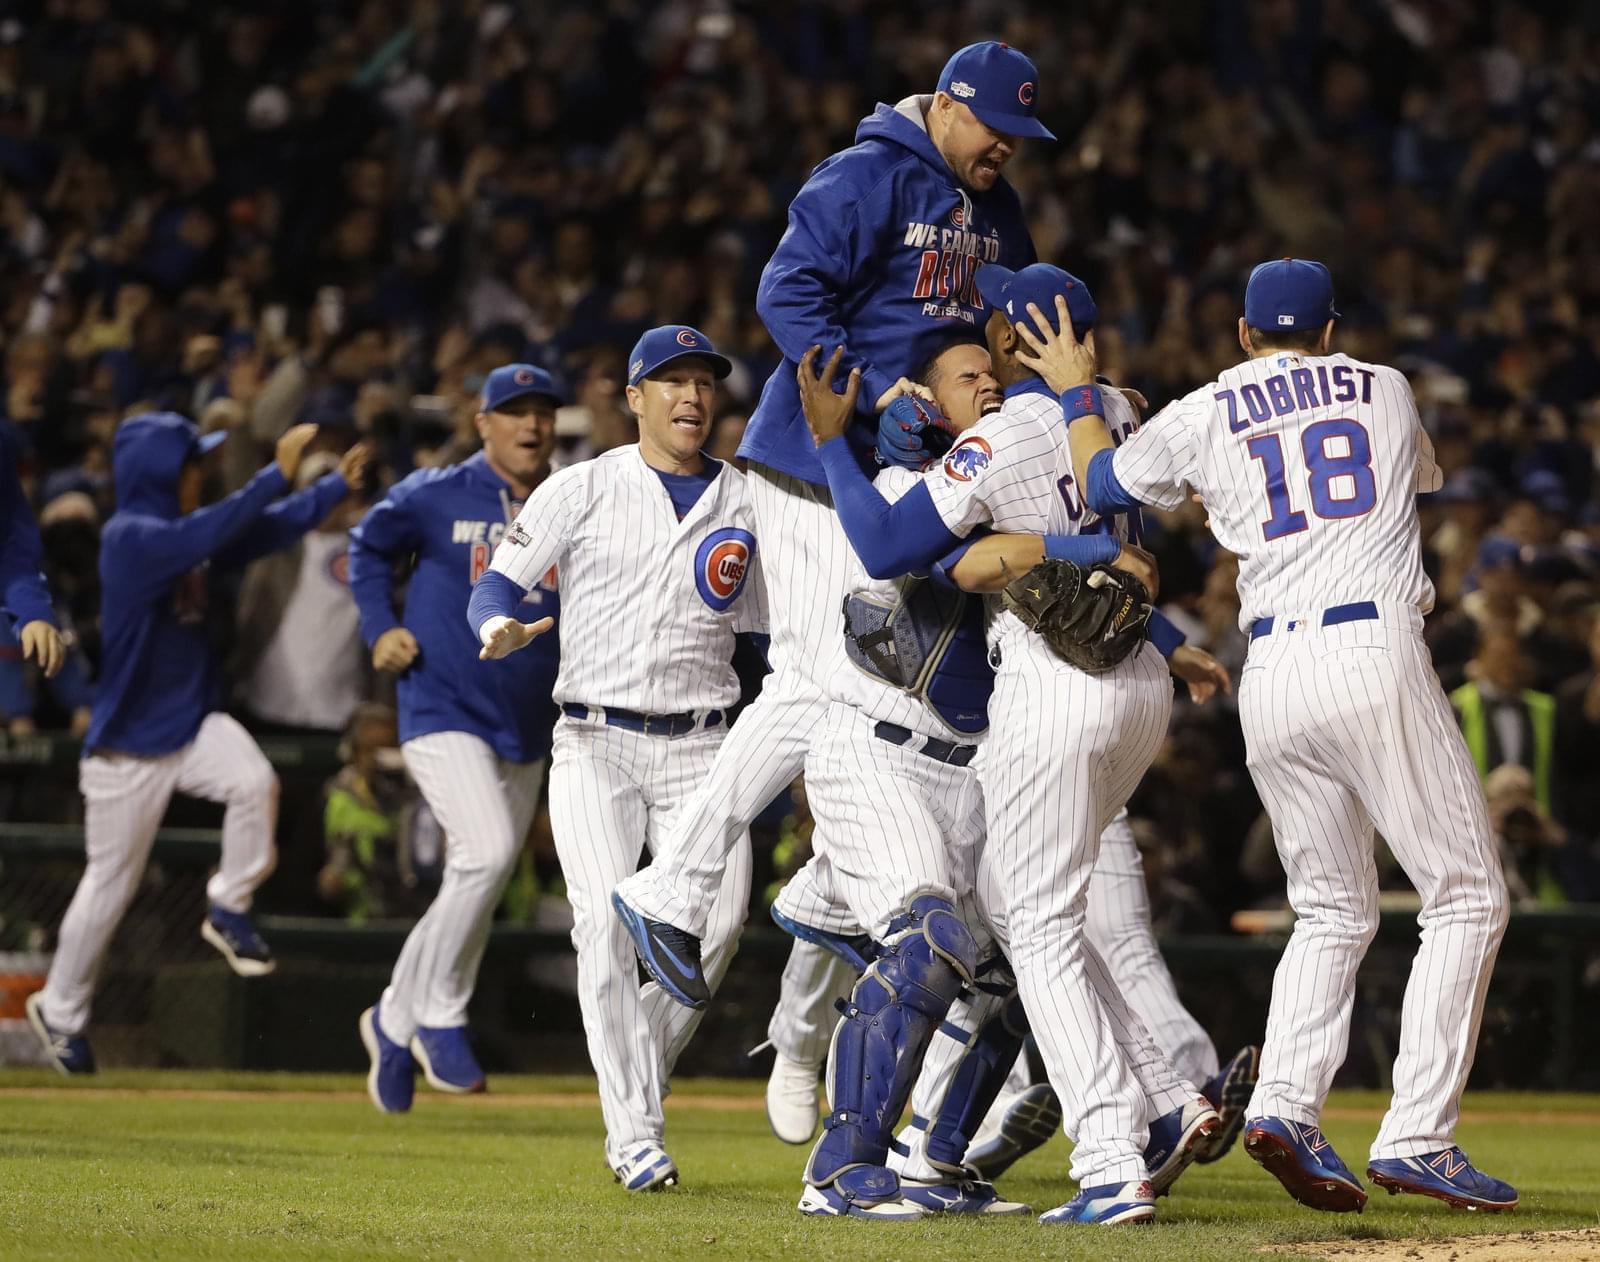 Cubs players celebrating after winning the 2016 National League pennant.